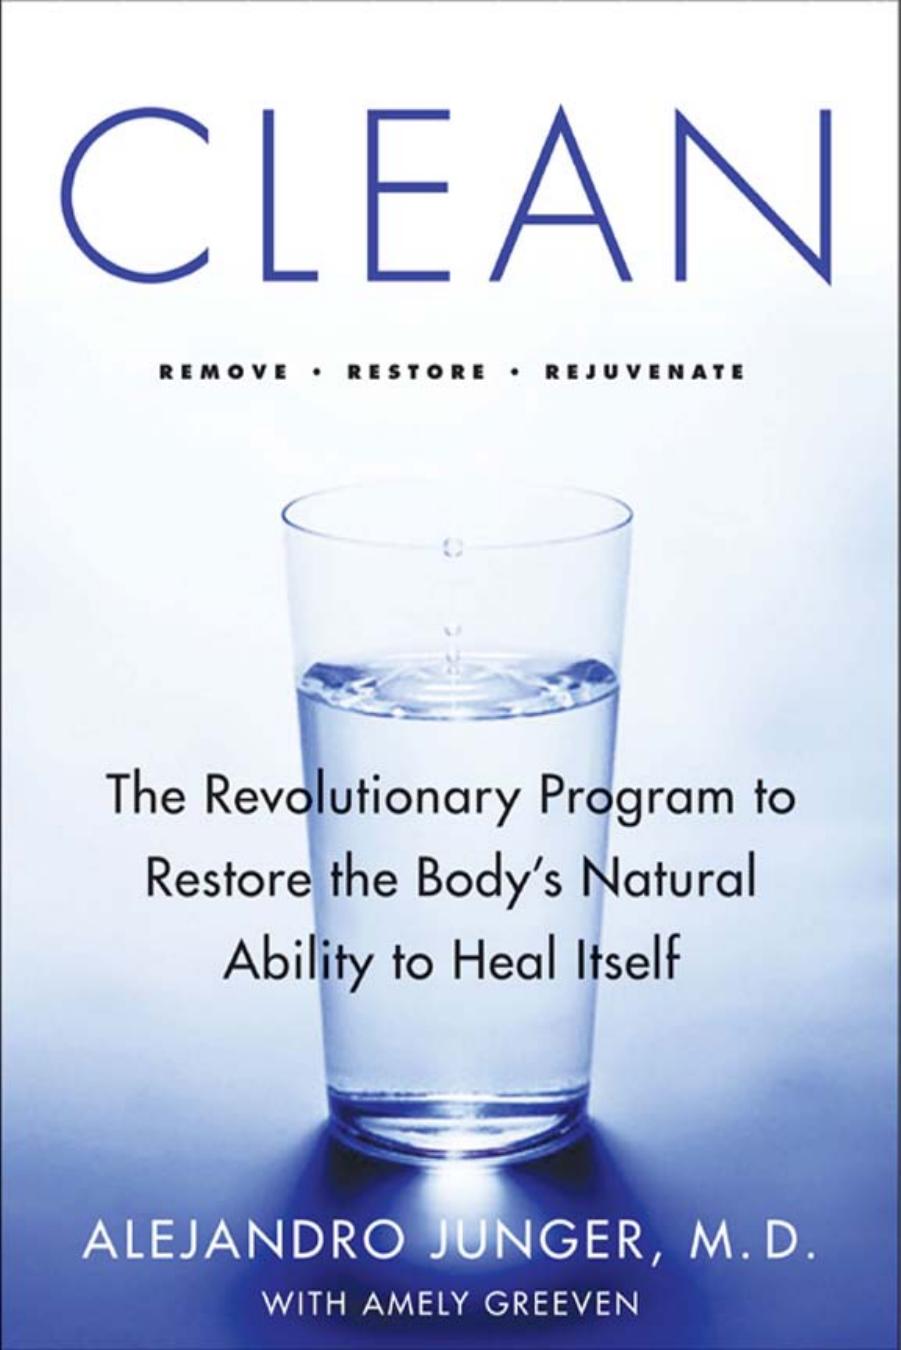 Clean: The Revolutionary Program to Restore the Body's Natural Ability to Heal Itself by Alejandro Junger